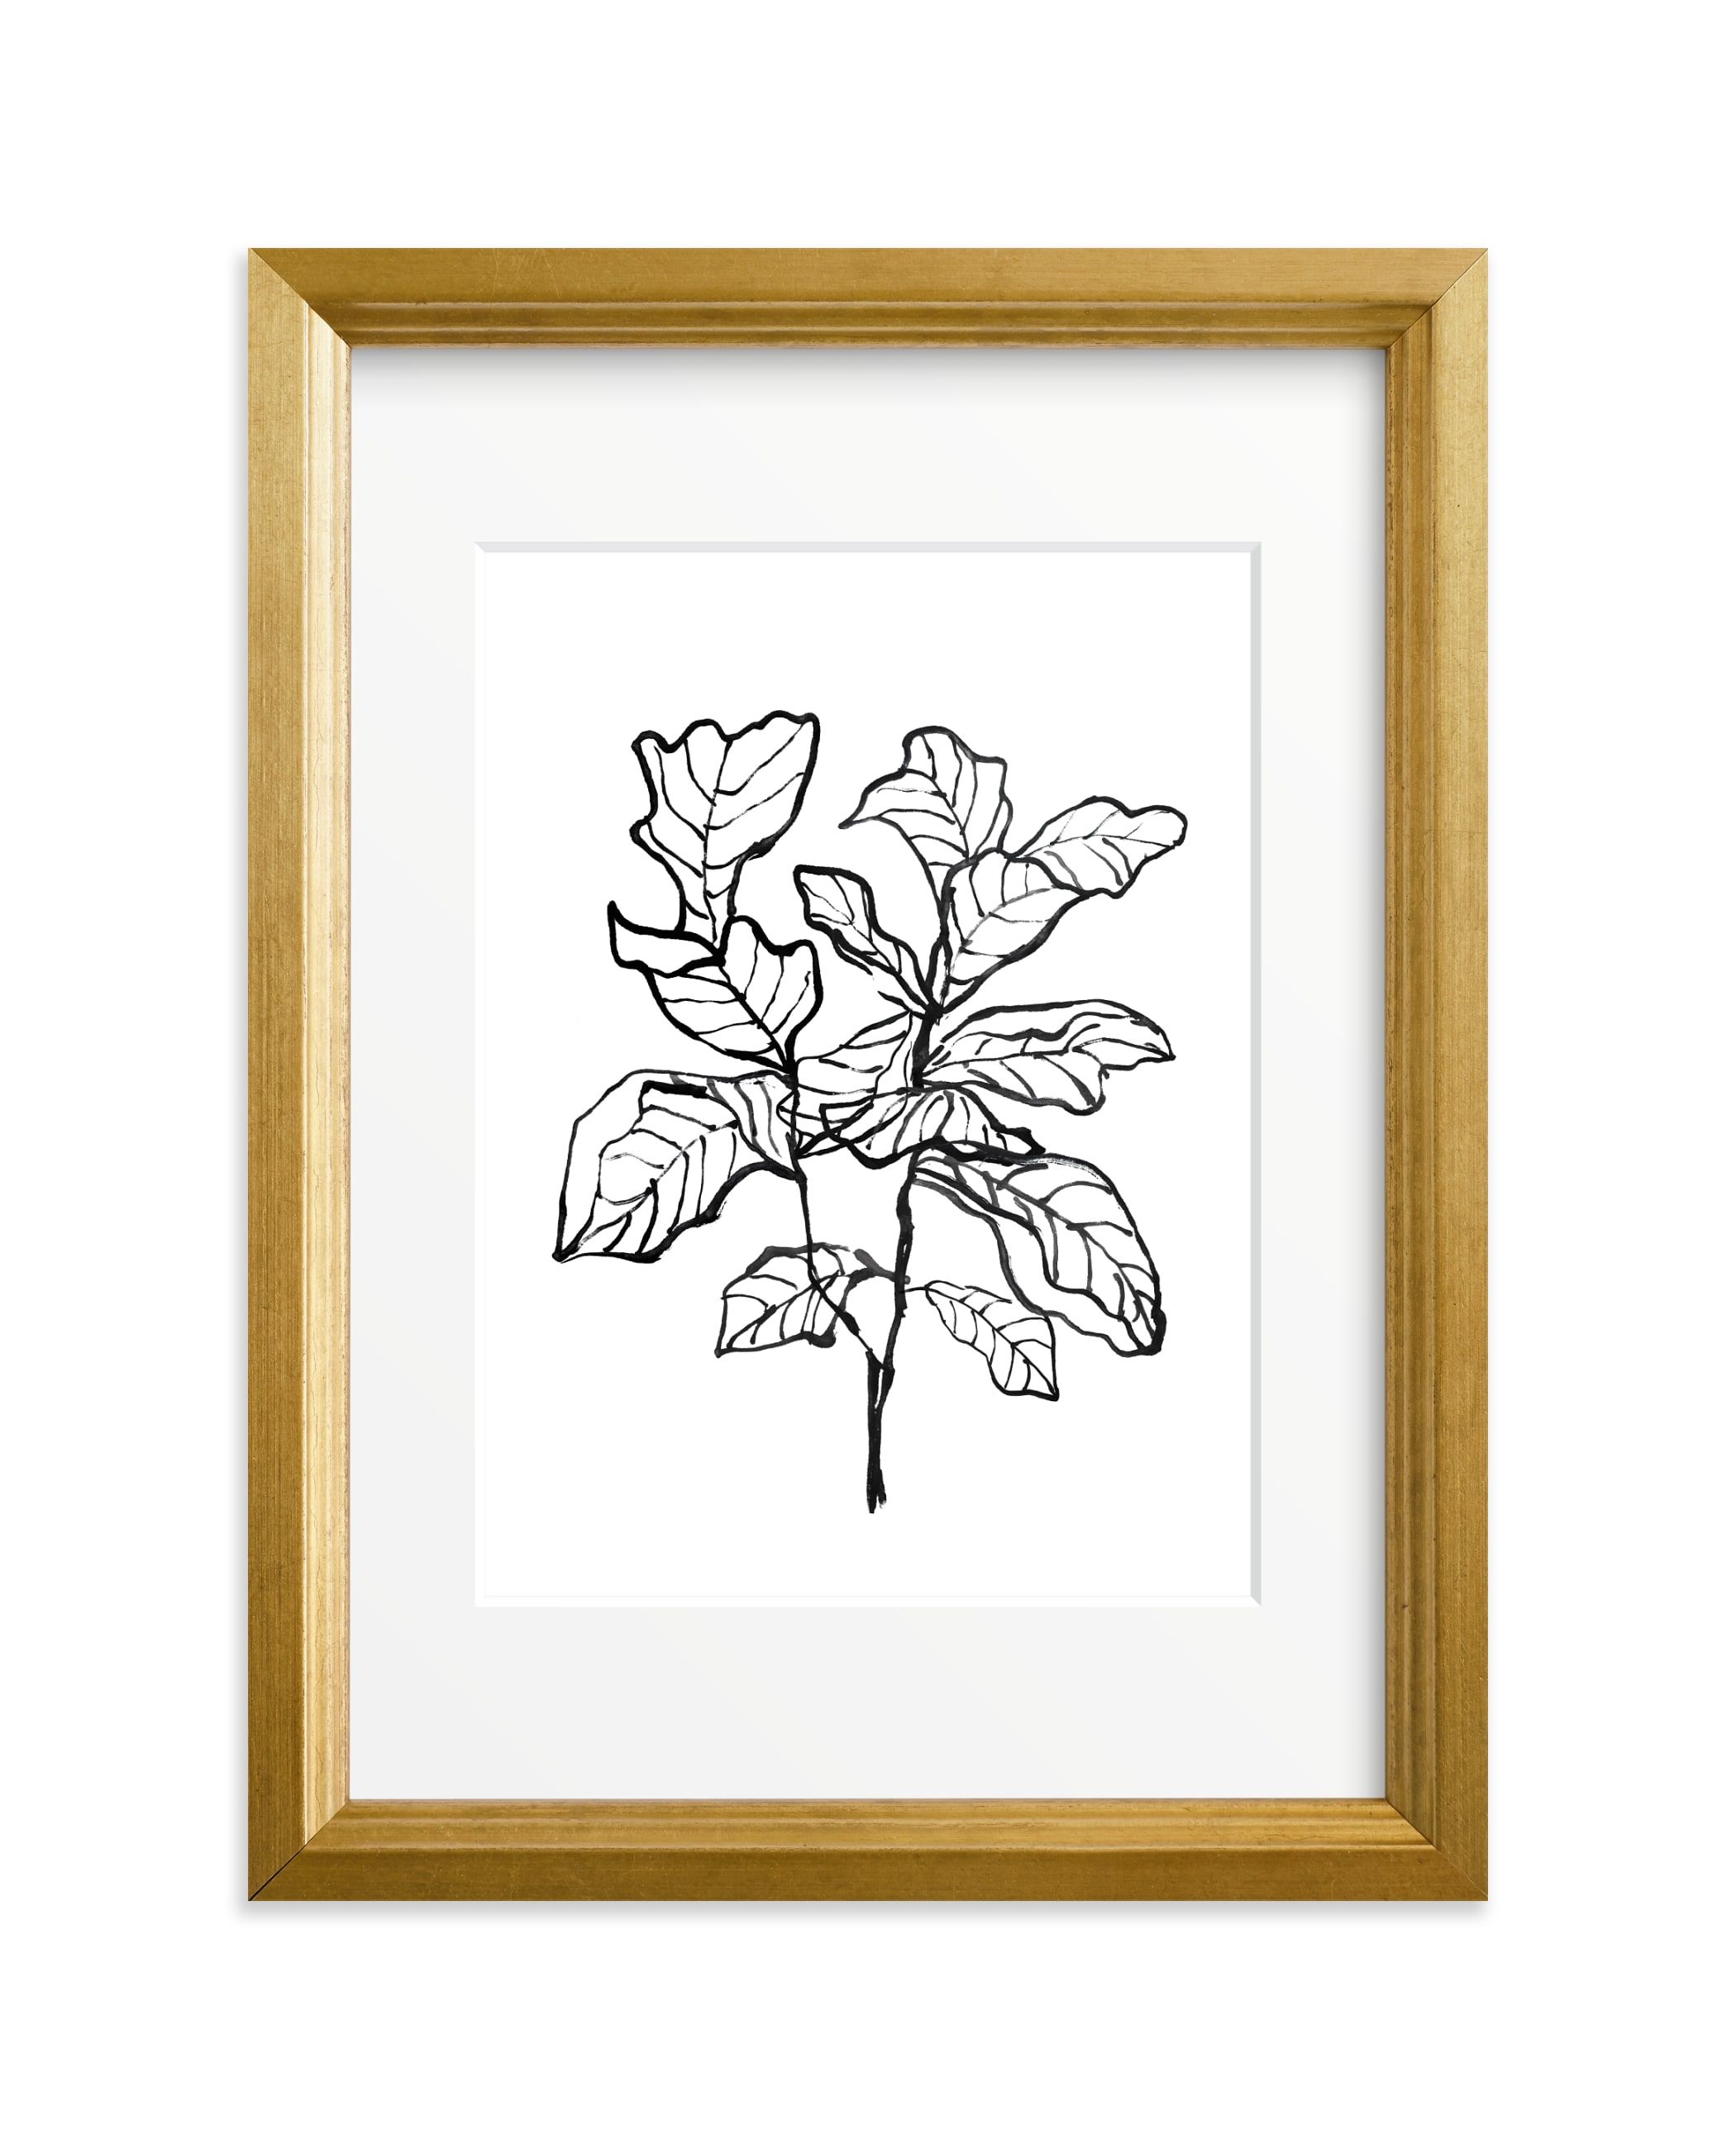 "Fiddle-leaf fig tree 1" - Drawing Limited Edition Art Print by Cass Loh. | Minted